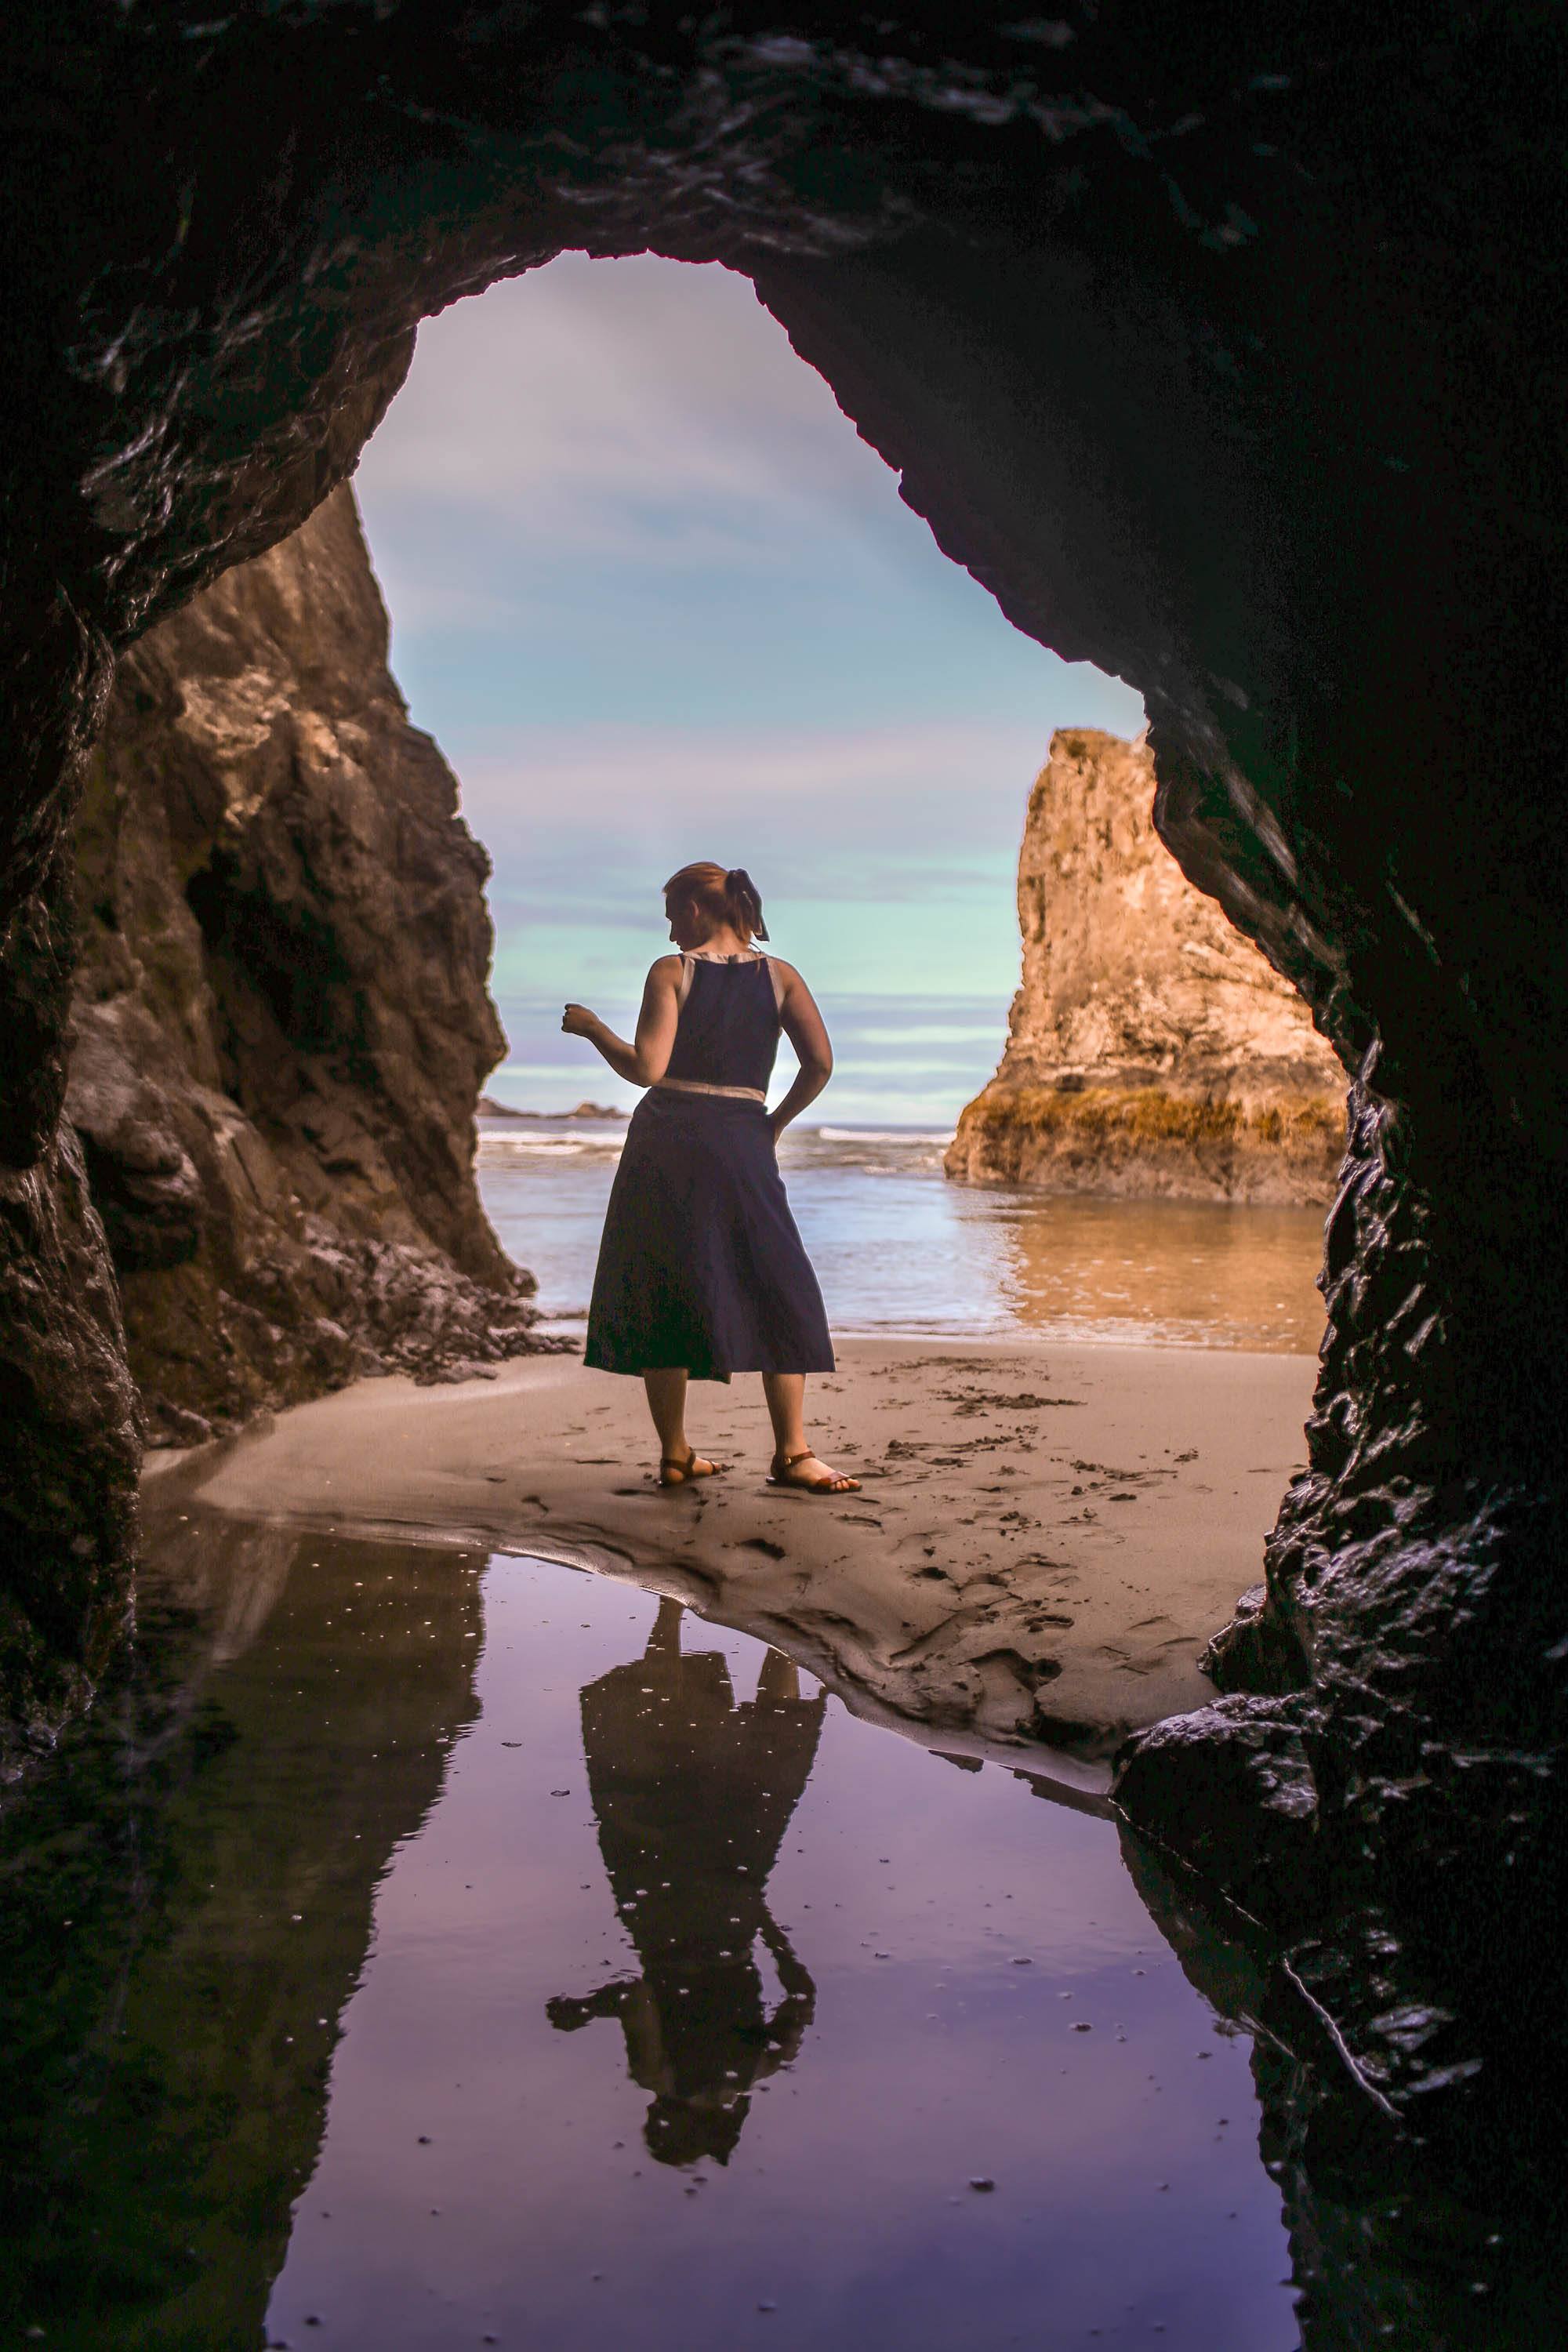 Woman in blue dress standing on beach through cave opening